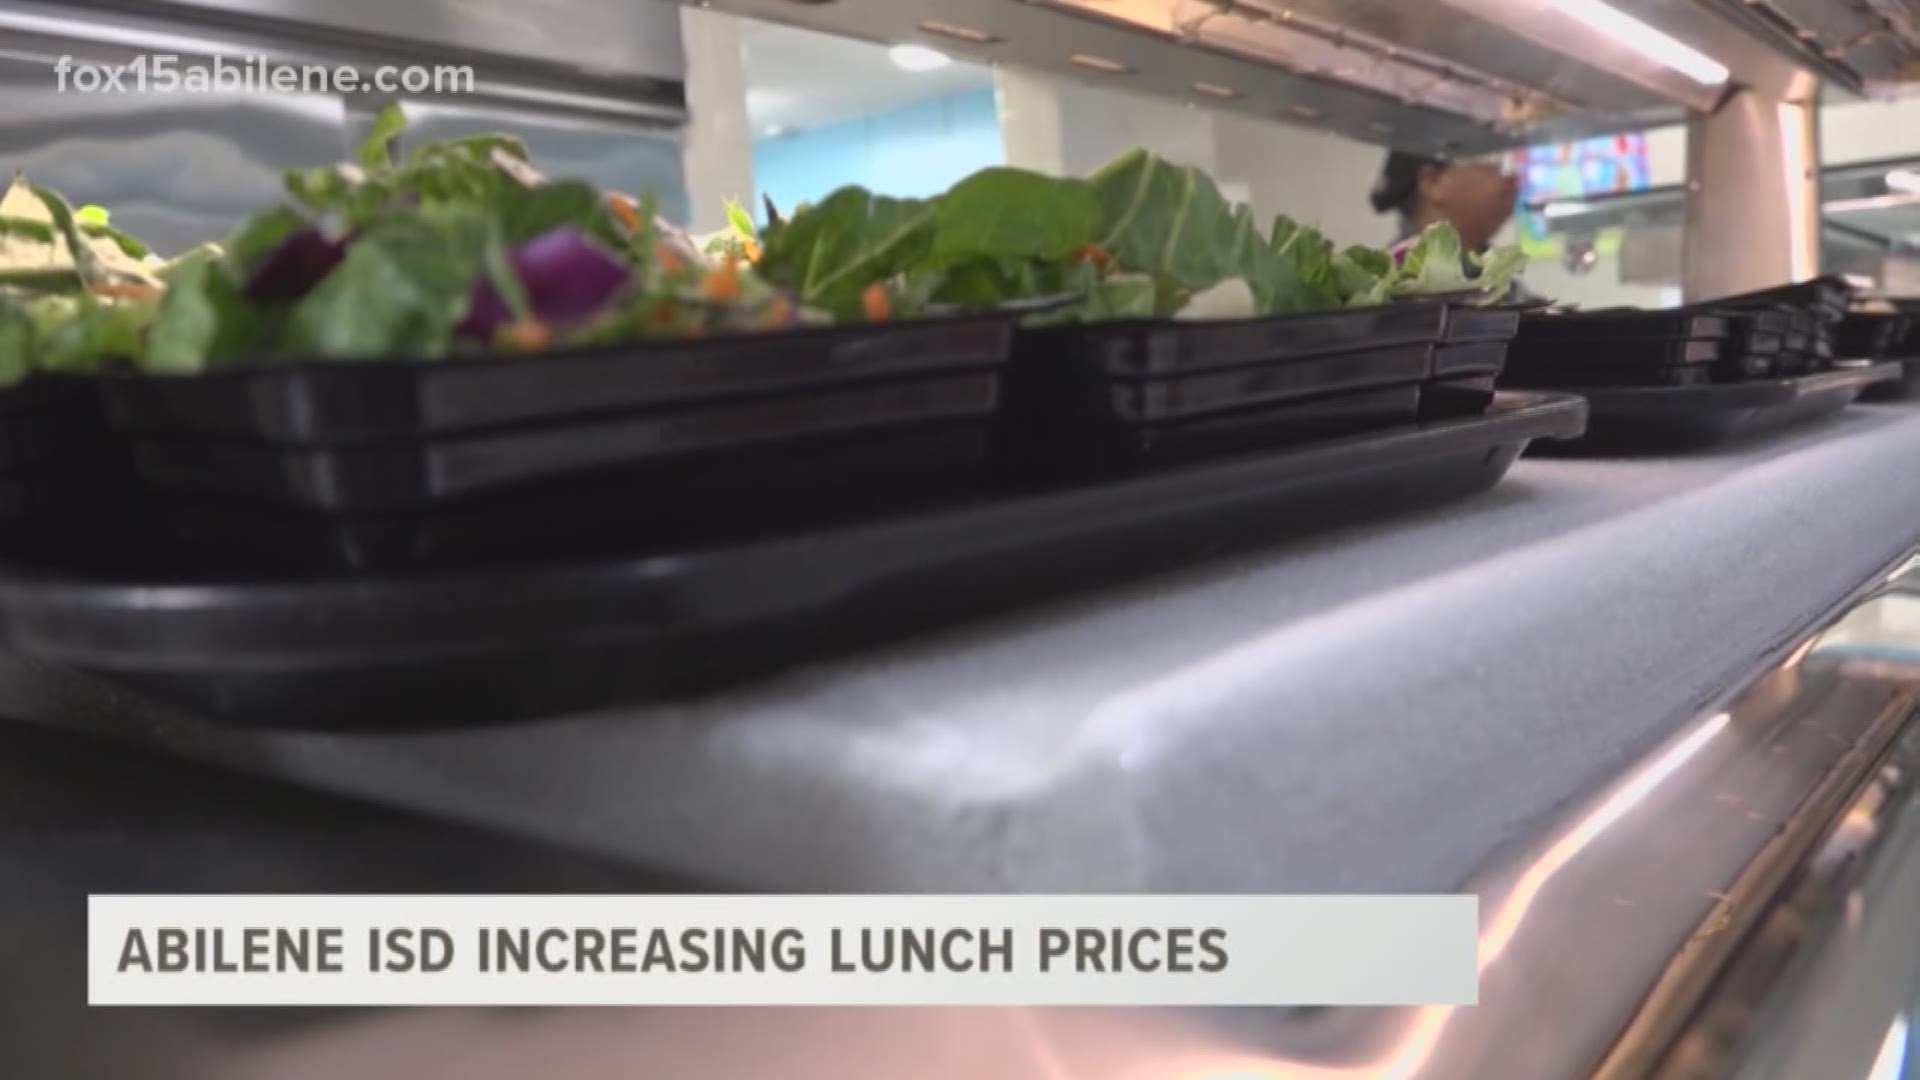 Abilene ISD plans to increase lunch prices in the coming school year.